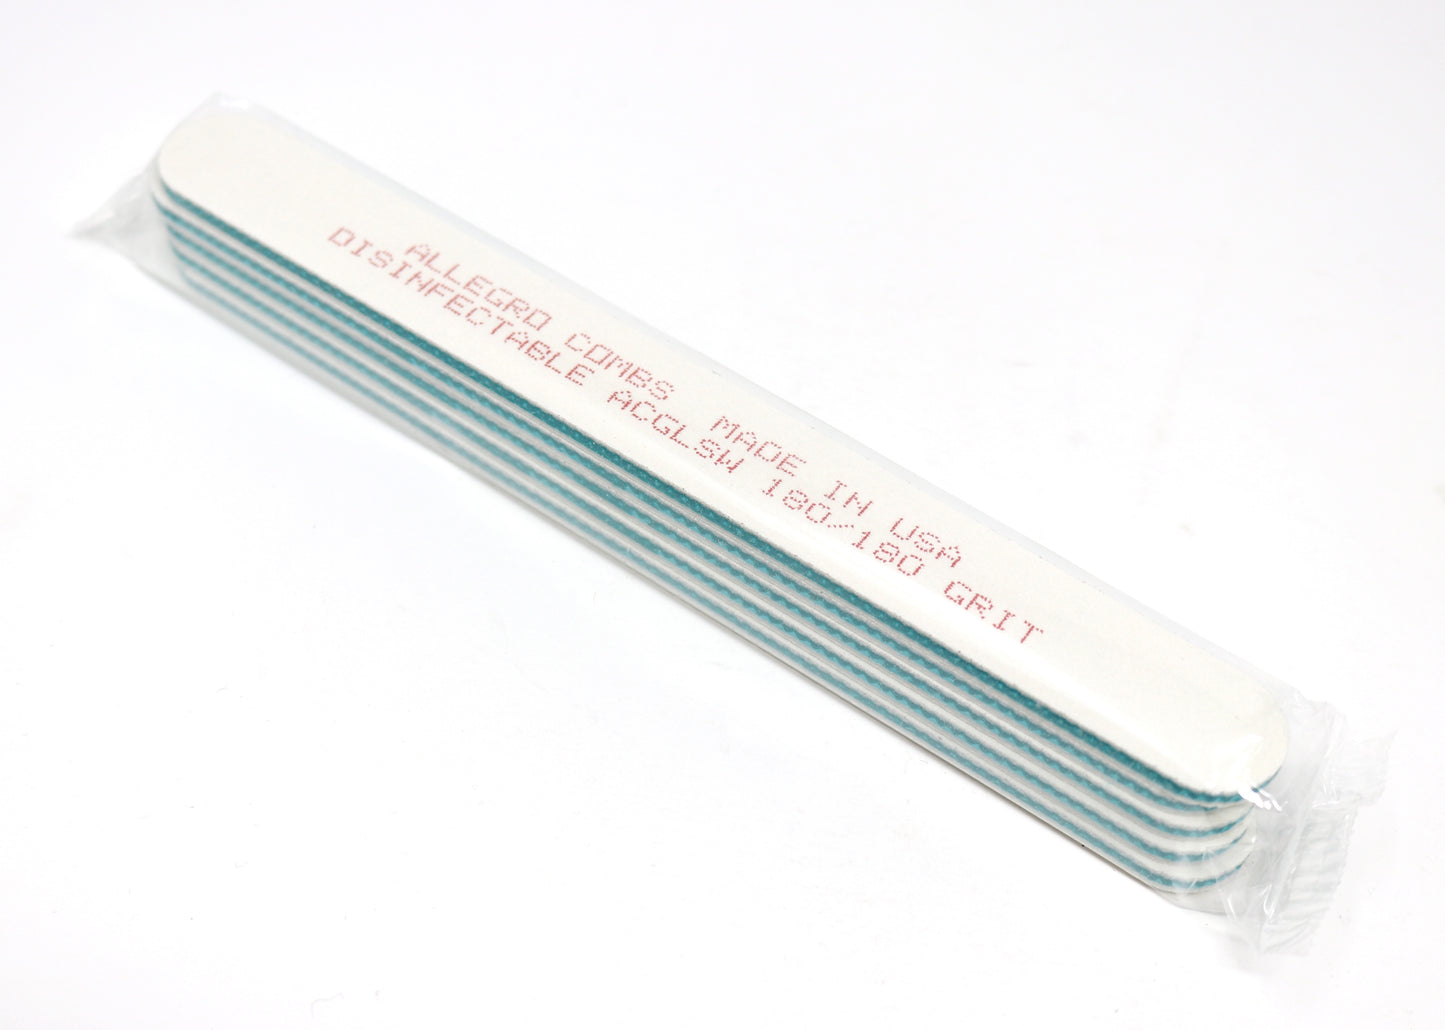 Allegro Combs Disinfetable Double Sided Cushioned Nail Files Emery Board Manicure Pedicure Salon Boards. White USA. Grits 080, 100, 180, 240. 5 Pcs